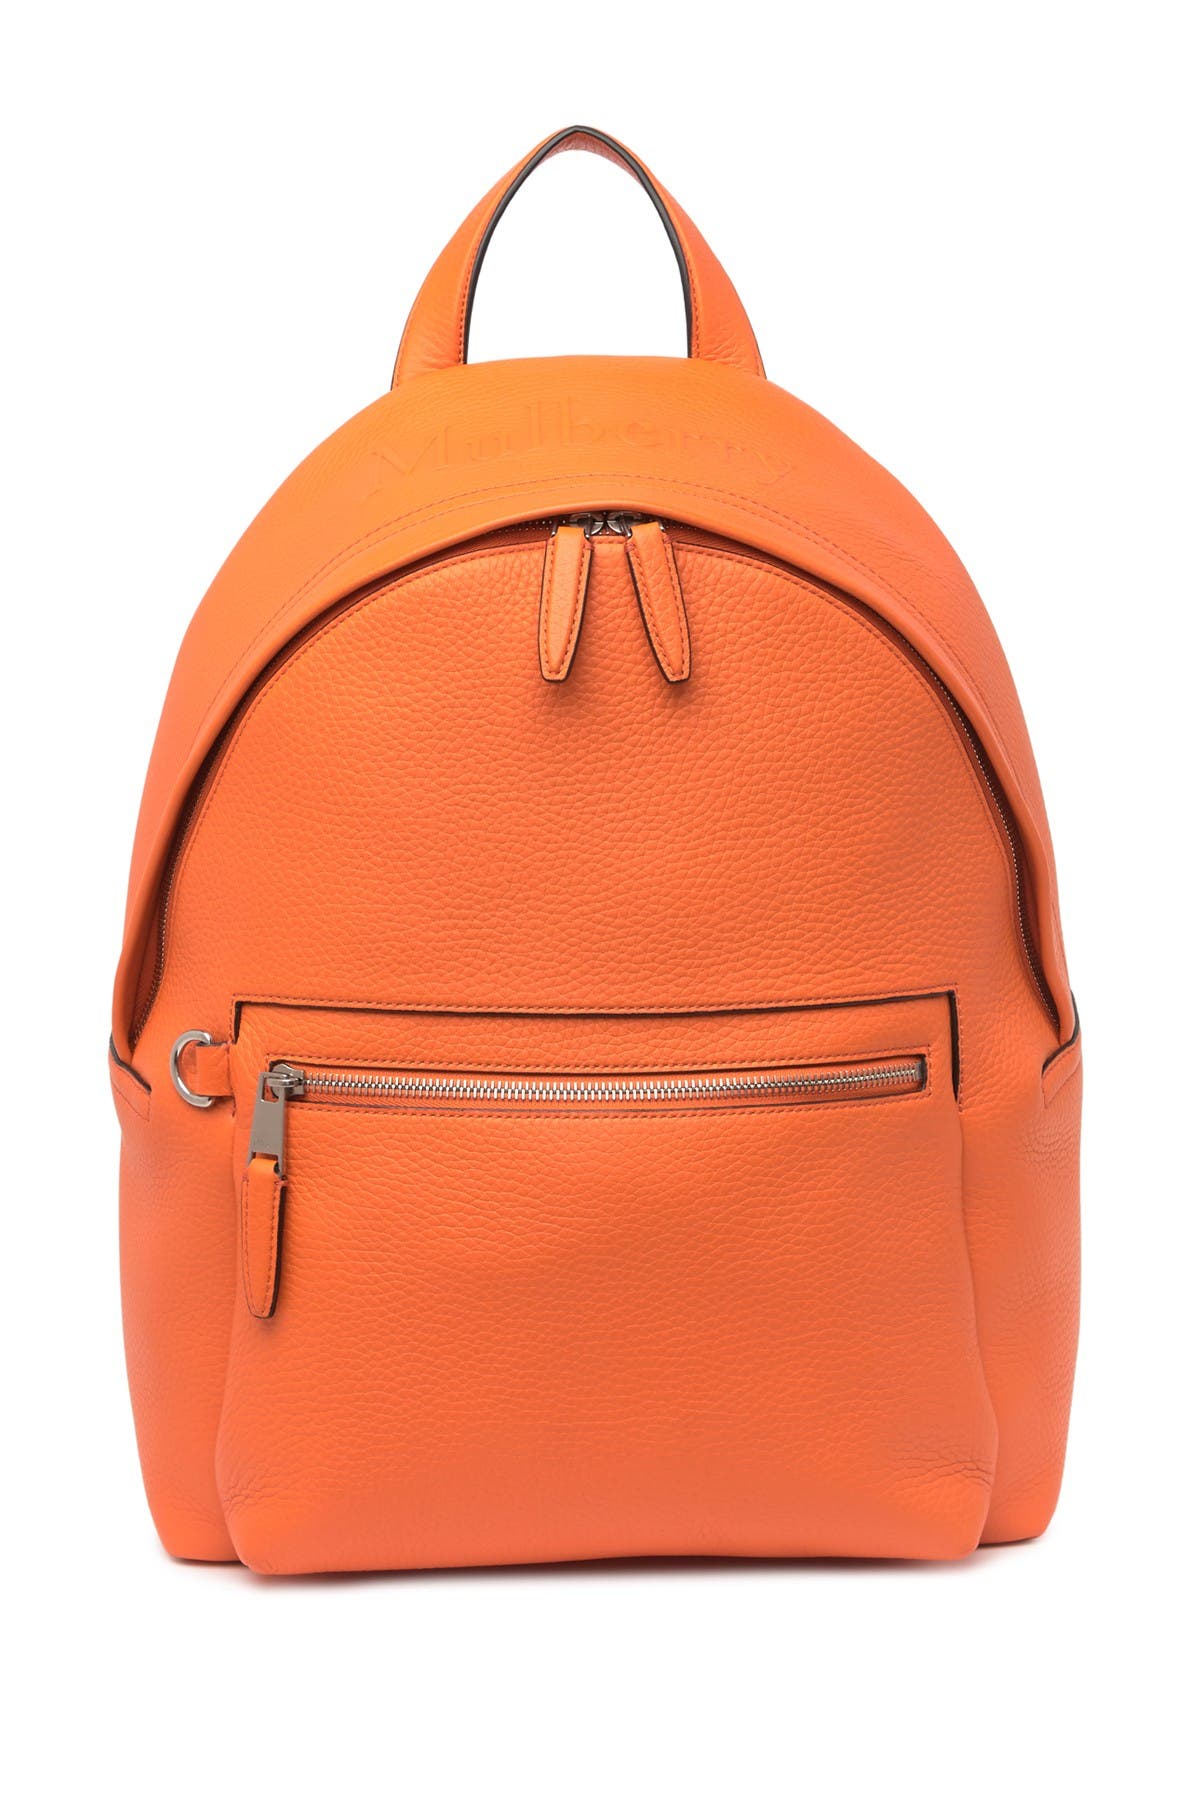 Mulberry Lifestyle Leather Backpack In Mandarin Orange